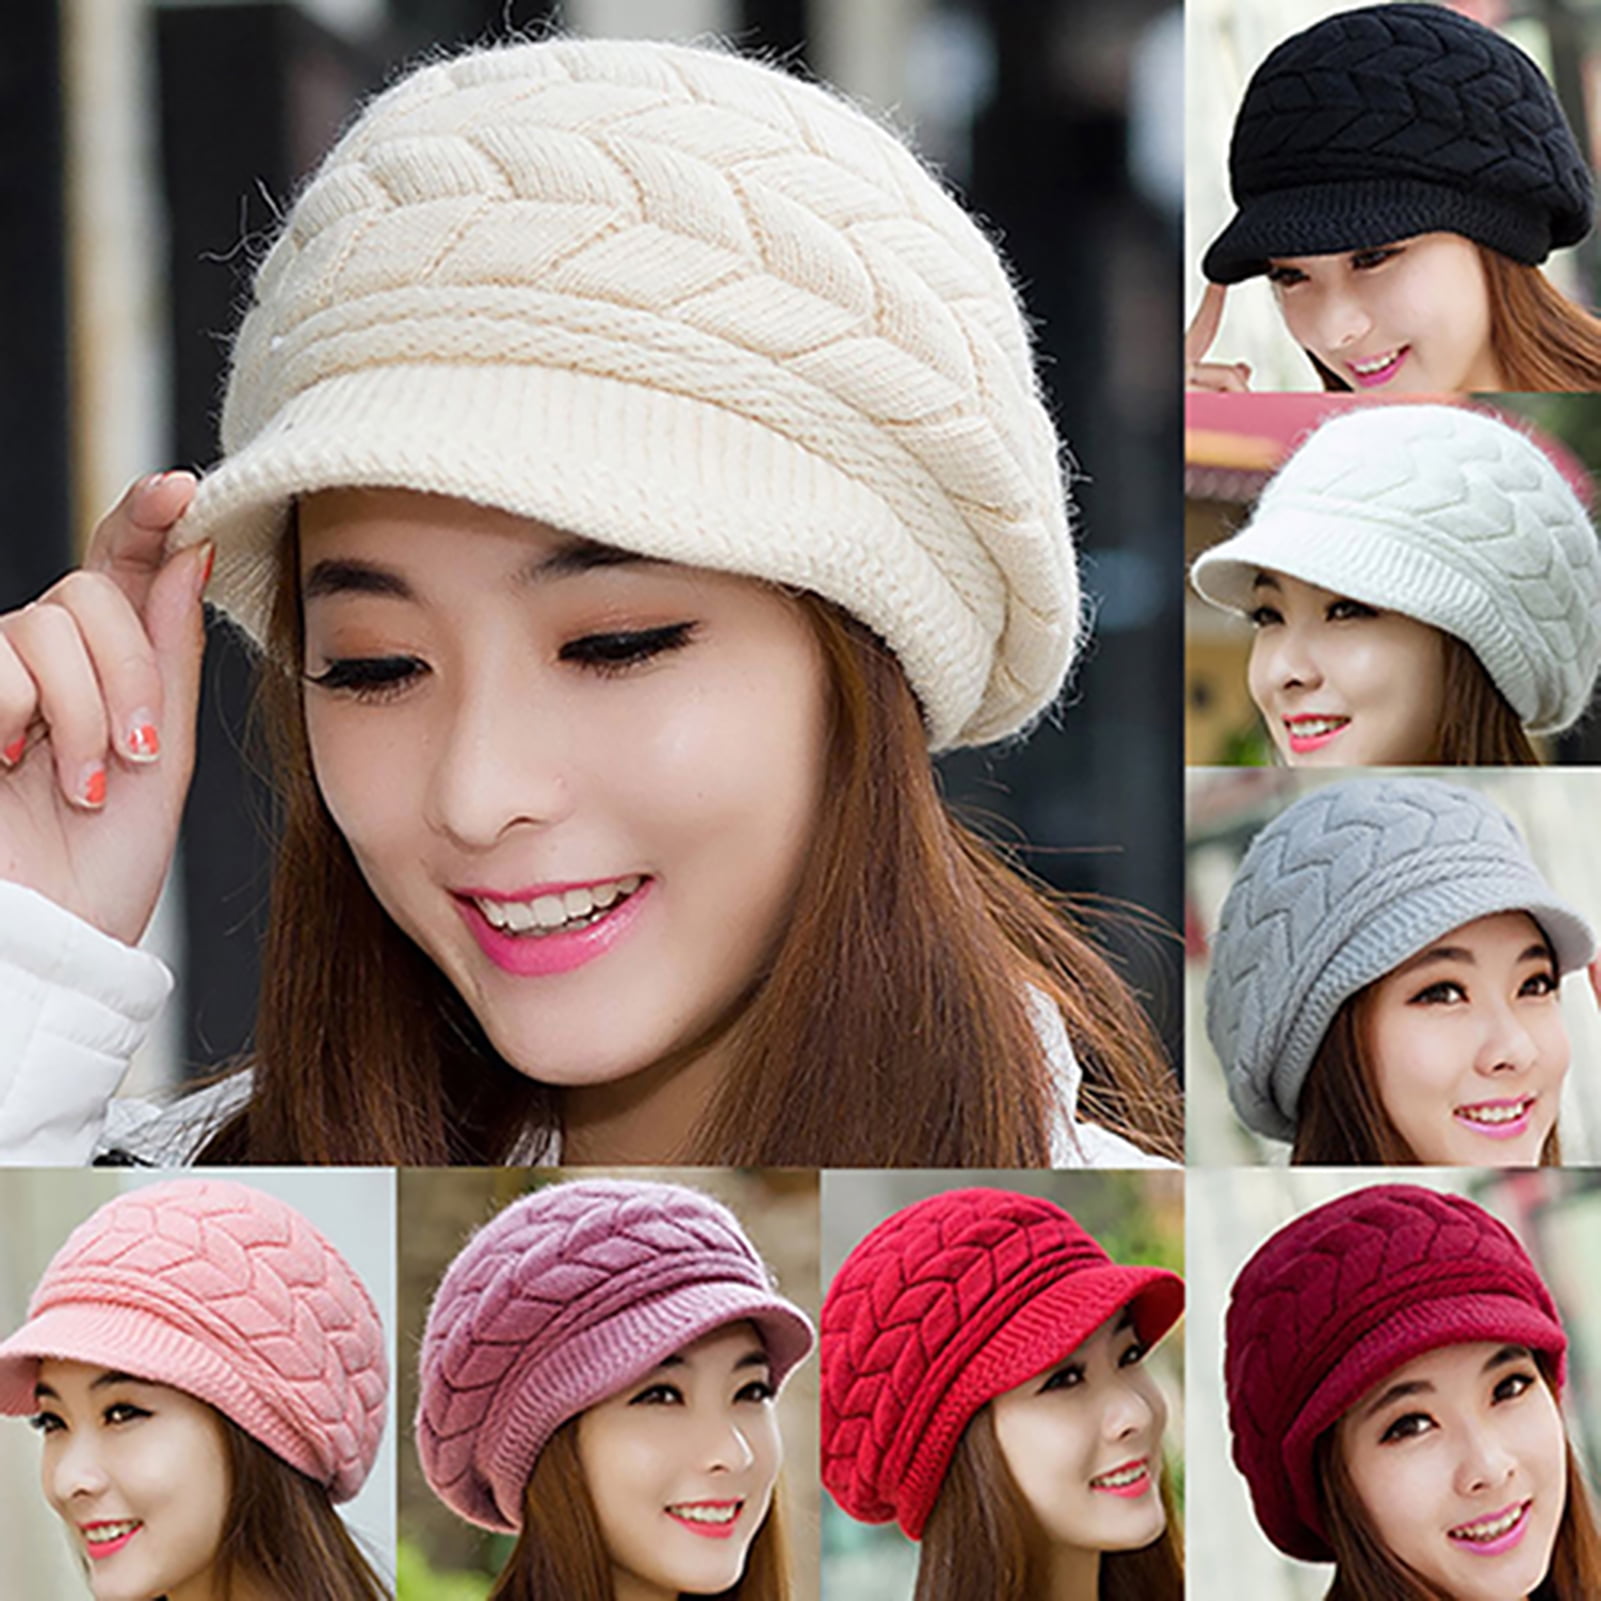 Ladies Knitted Slouch Winter Warm Cozy Fashion Girls Beret Beanie Skiing Hat Cap